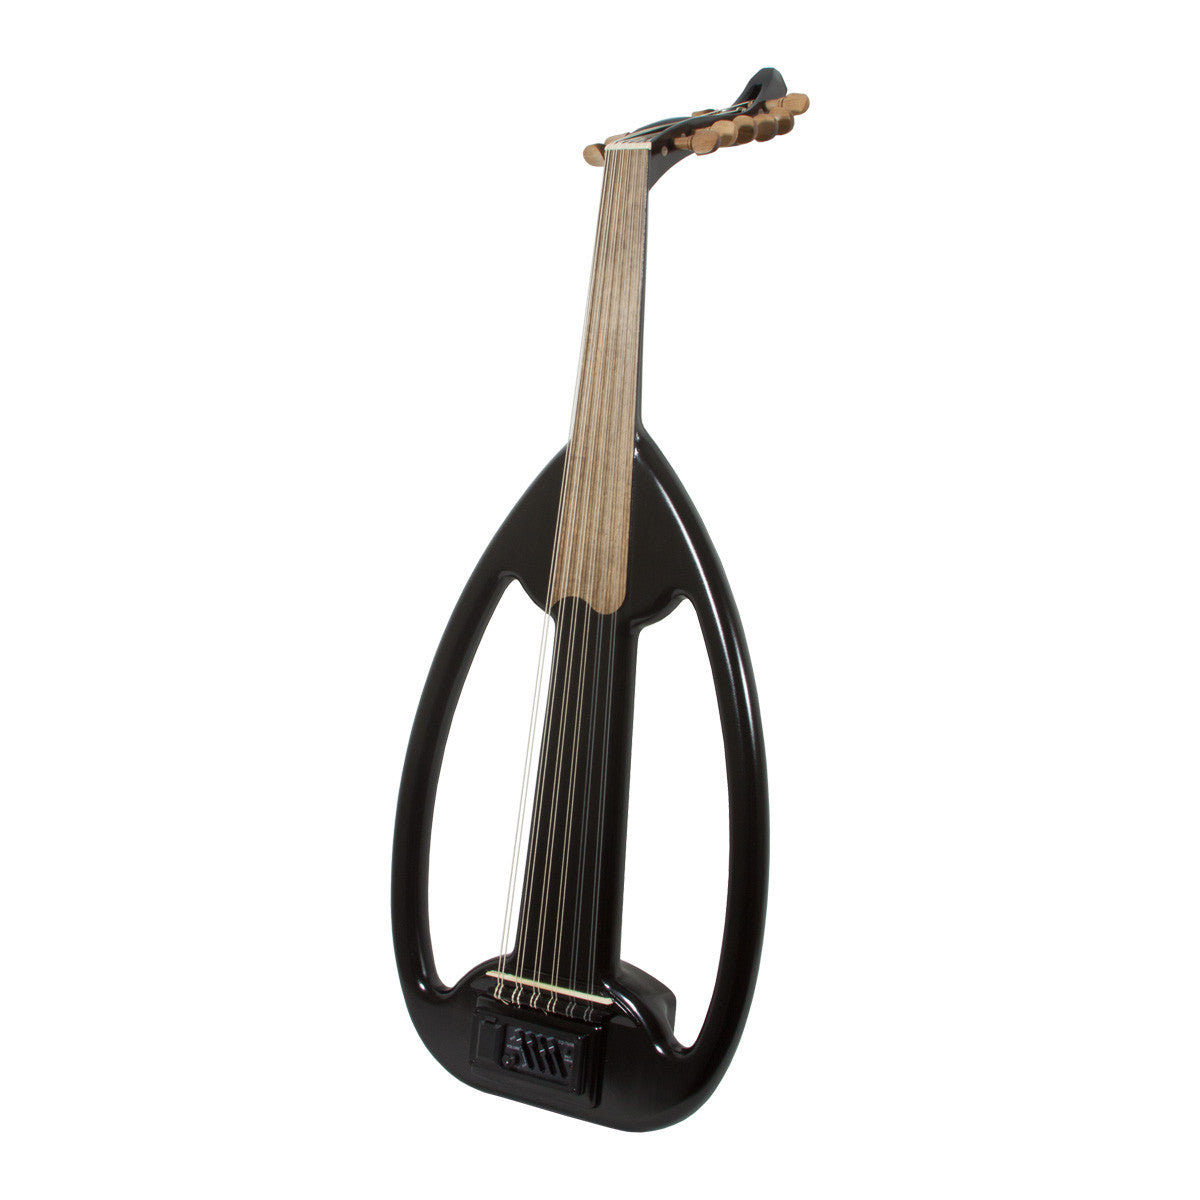 Mid-East Arabic Electric Frame Oud with Pegs - Lacewood - Black Ouds Mid-East   